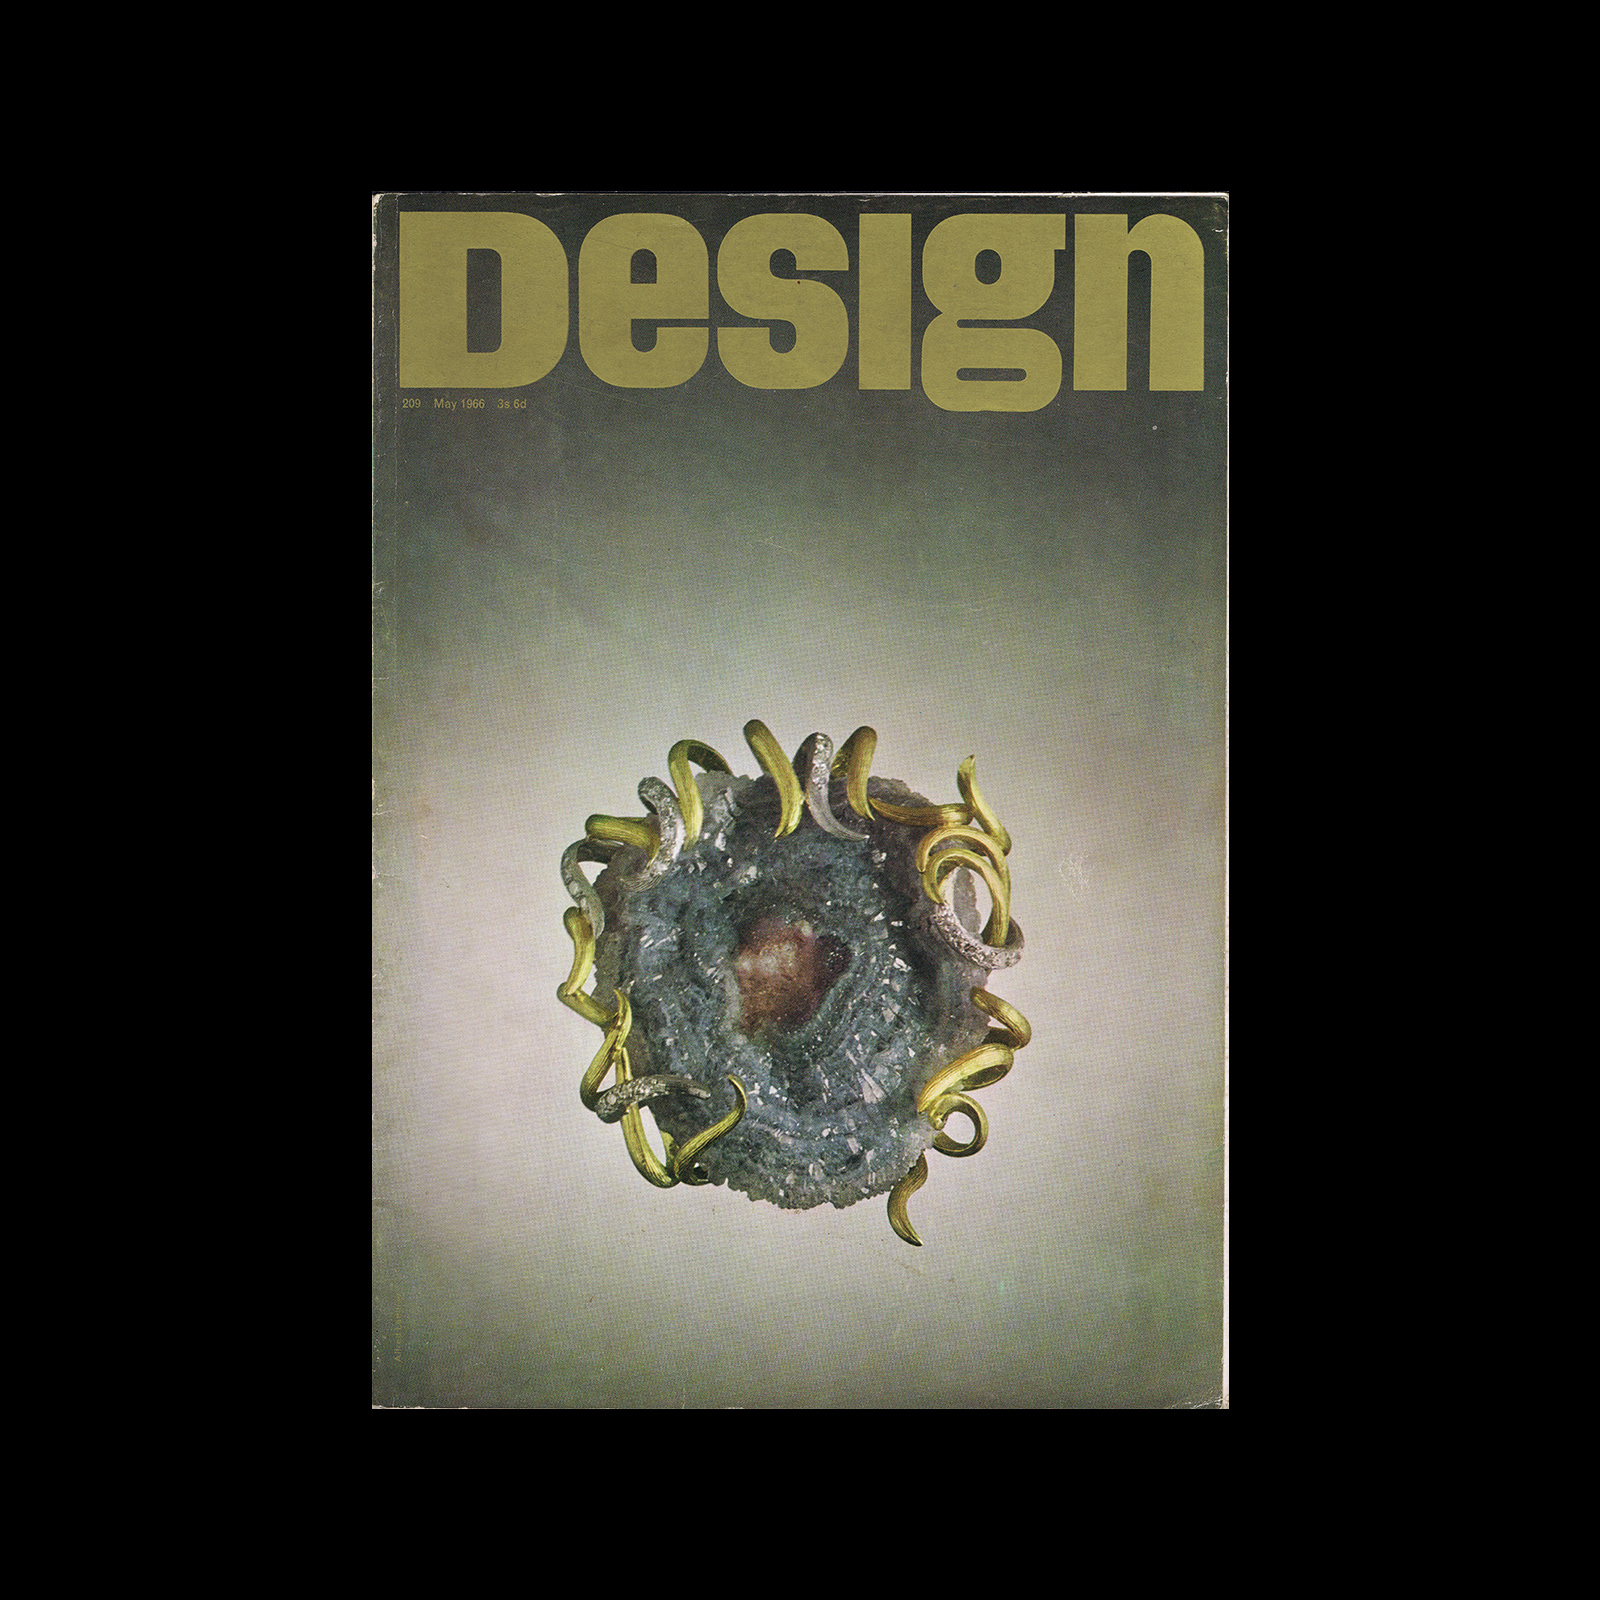 Design, Council of Industrial Design, 209, May 1966